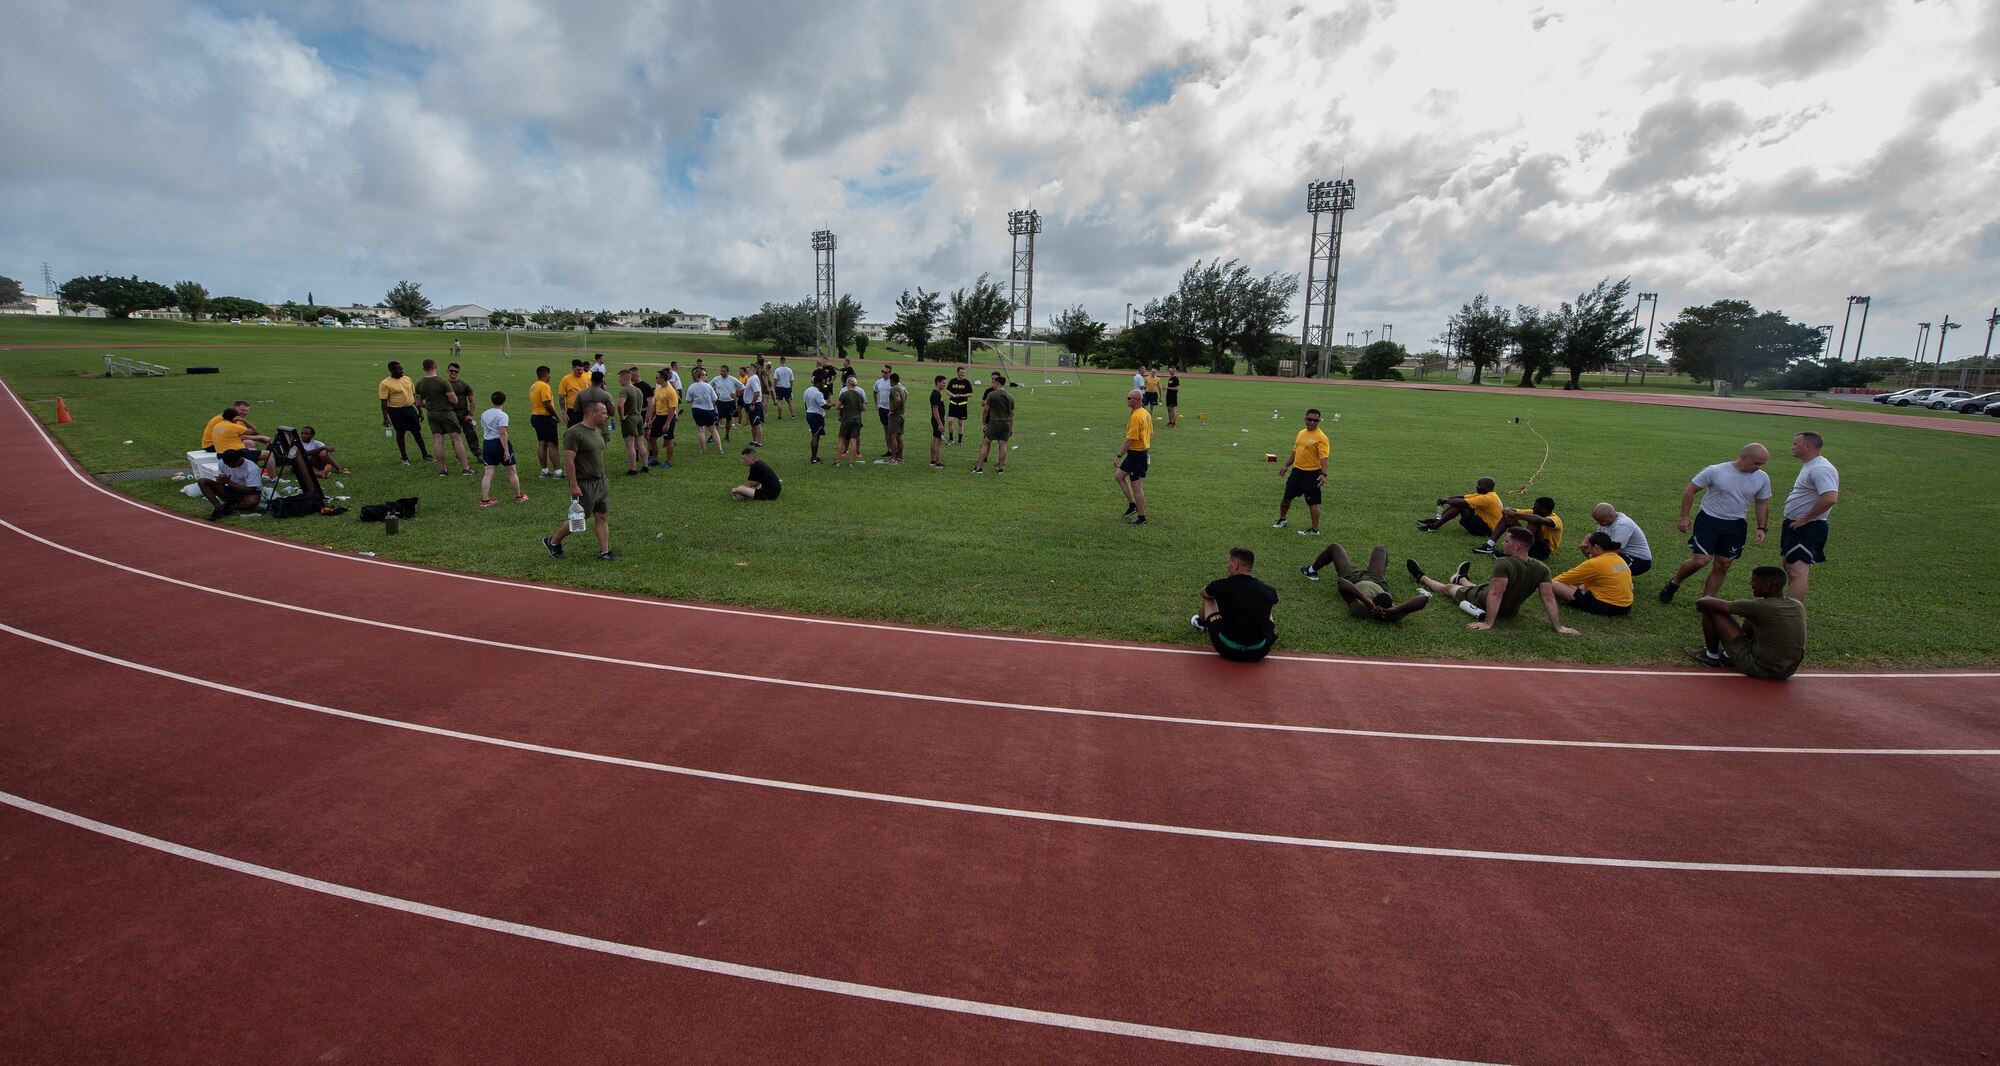 U.S. service members take a break during the Okinawa Joint Fitness Challenge Sept. 26, 2018, at Kadena Air Base, Japan. Service members from the Army, Navy, Air Force and Marine Corps were equally broken up into four classes to provide a joint learning environment. (U.S. Air Force photo by Staff Sgt. Micaiah Anthony)